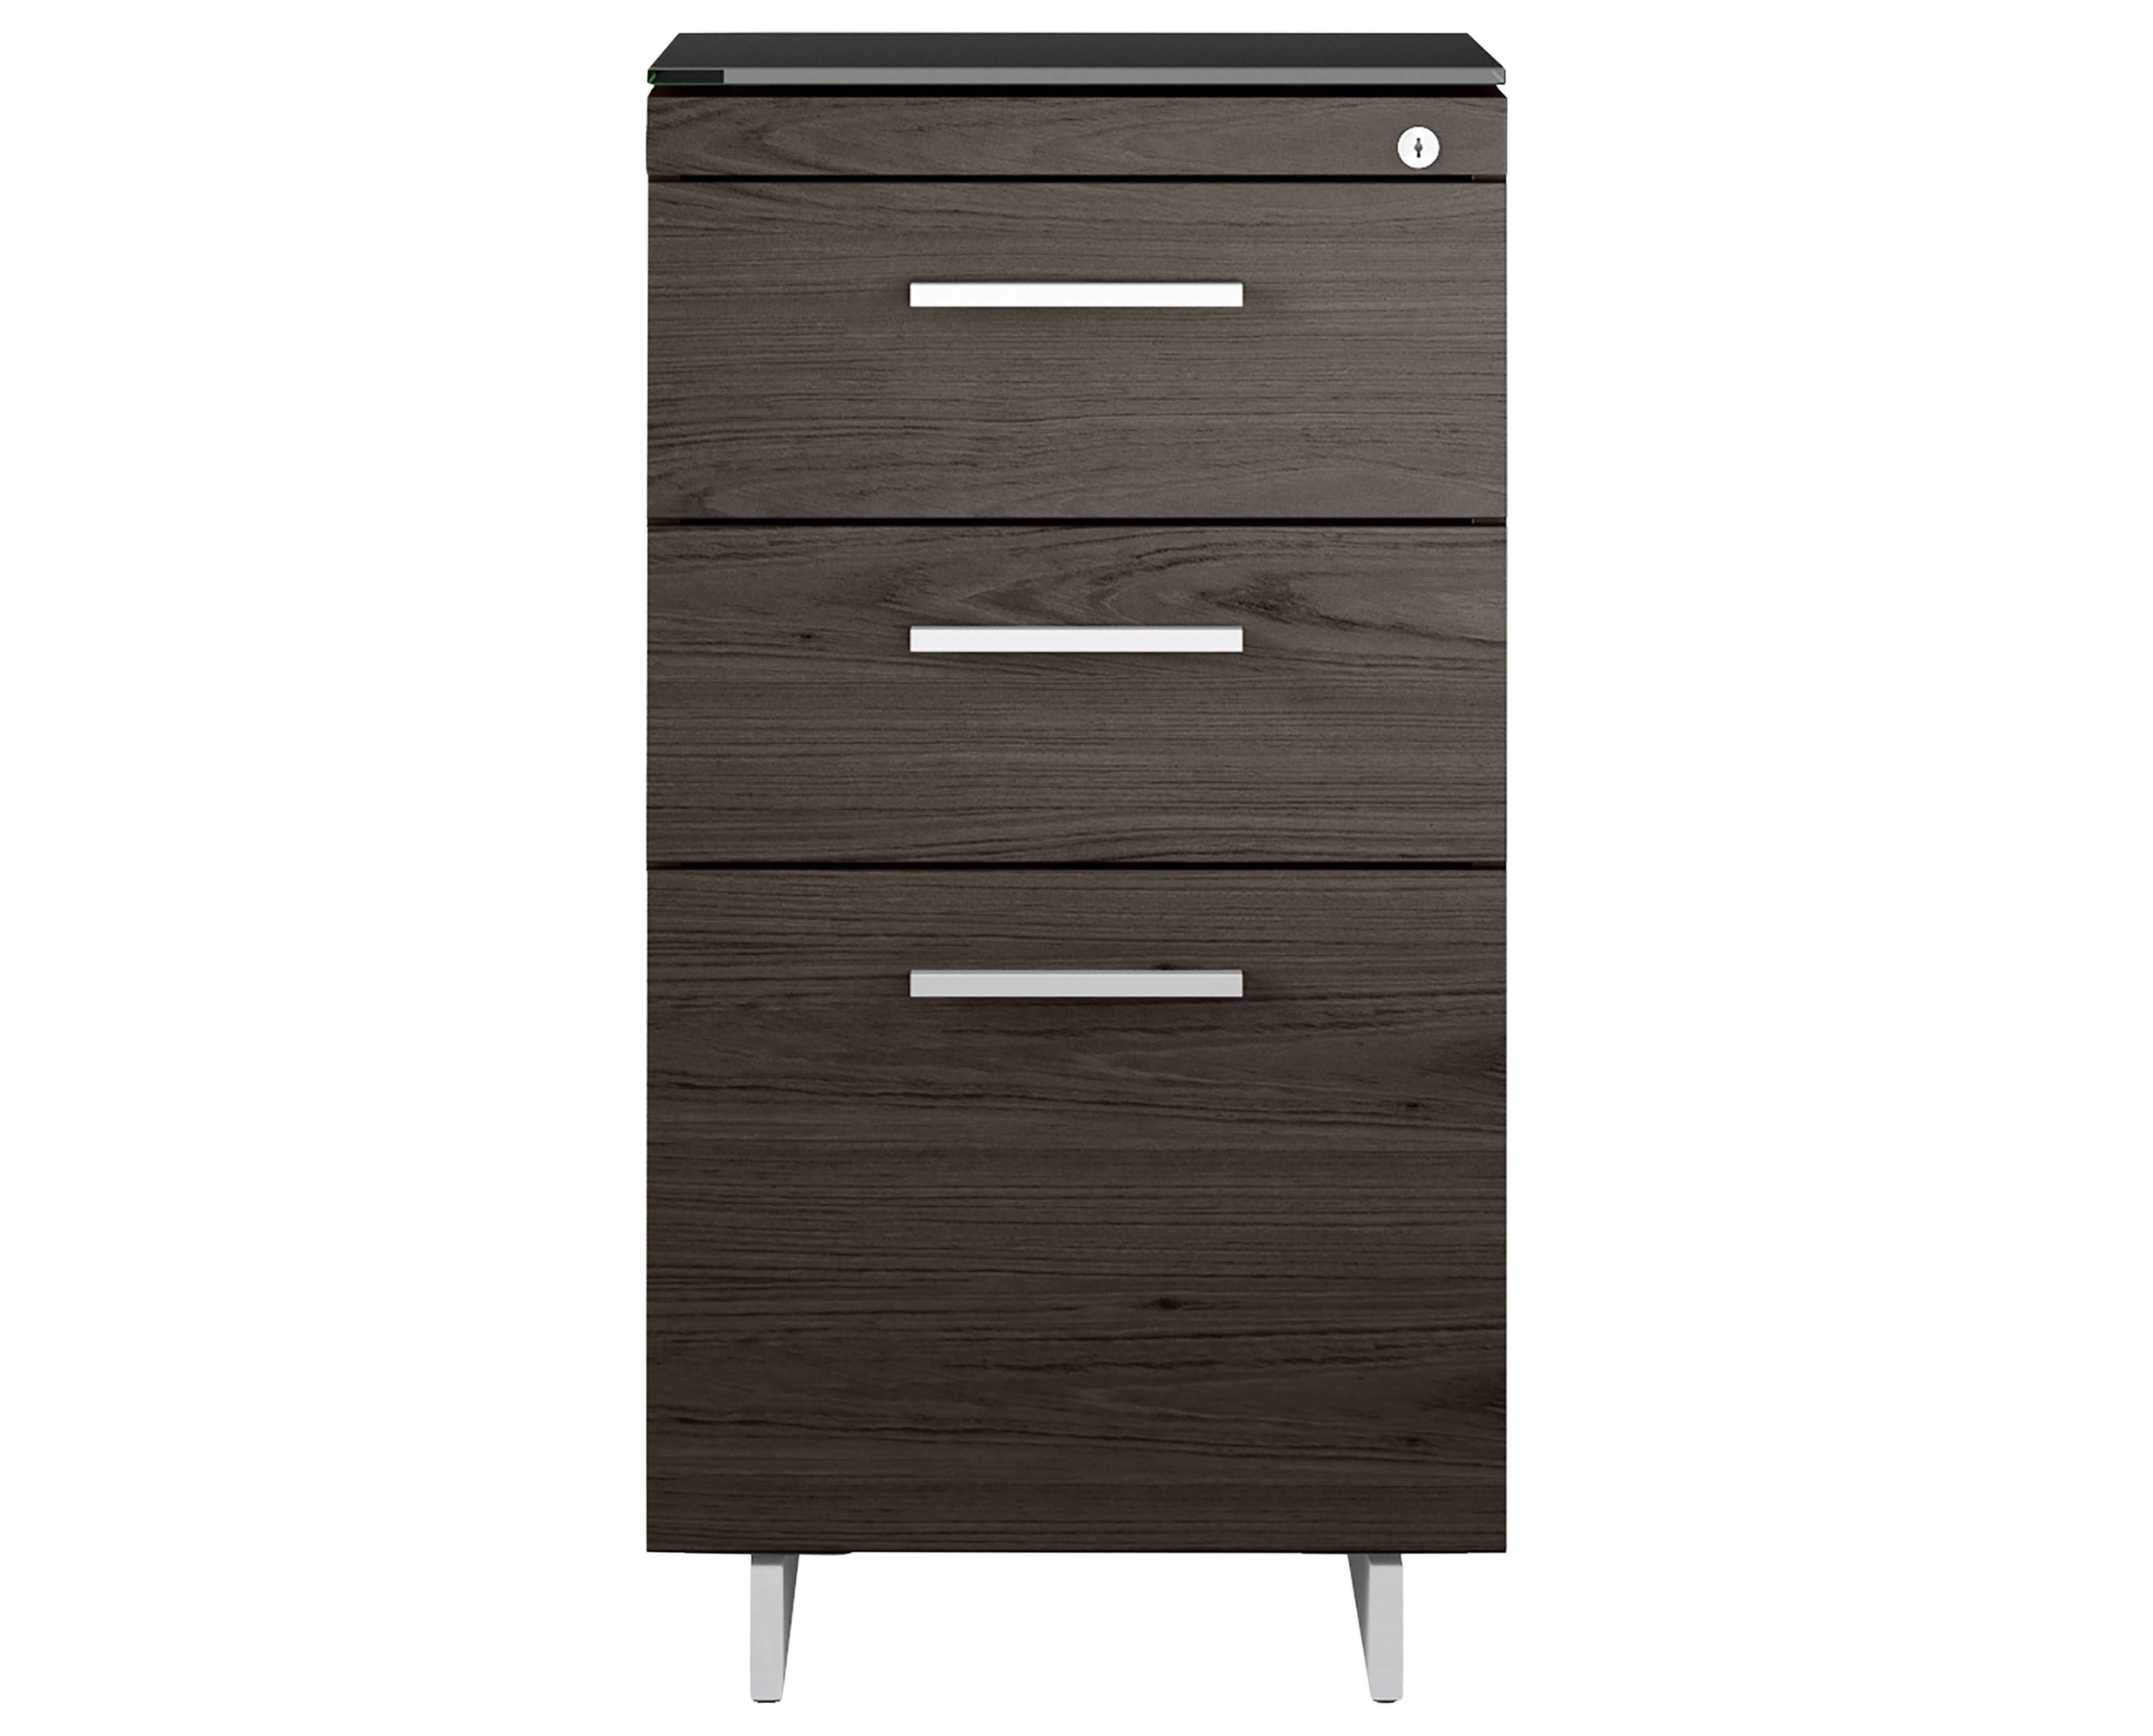 Charcoal Ash Veneer and Black Satin-Etched Glass with Satin Nickel Steel | BDI Sequel 3 Drawer File Cabinet | Valley Ridge Furniture